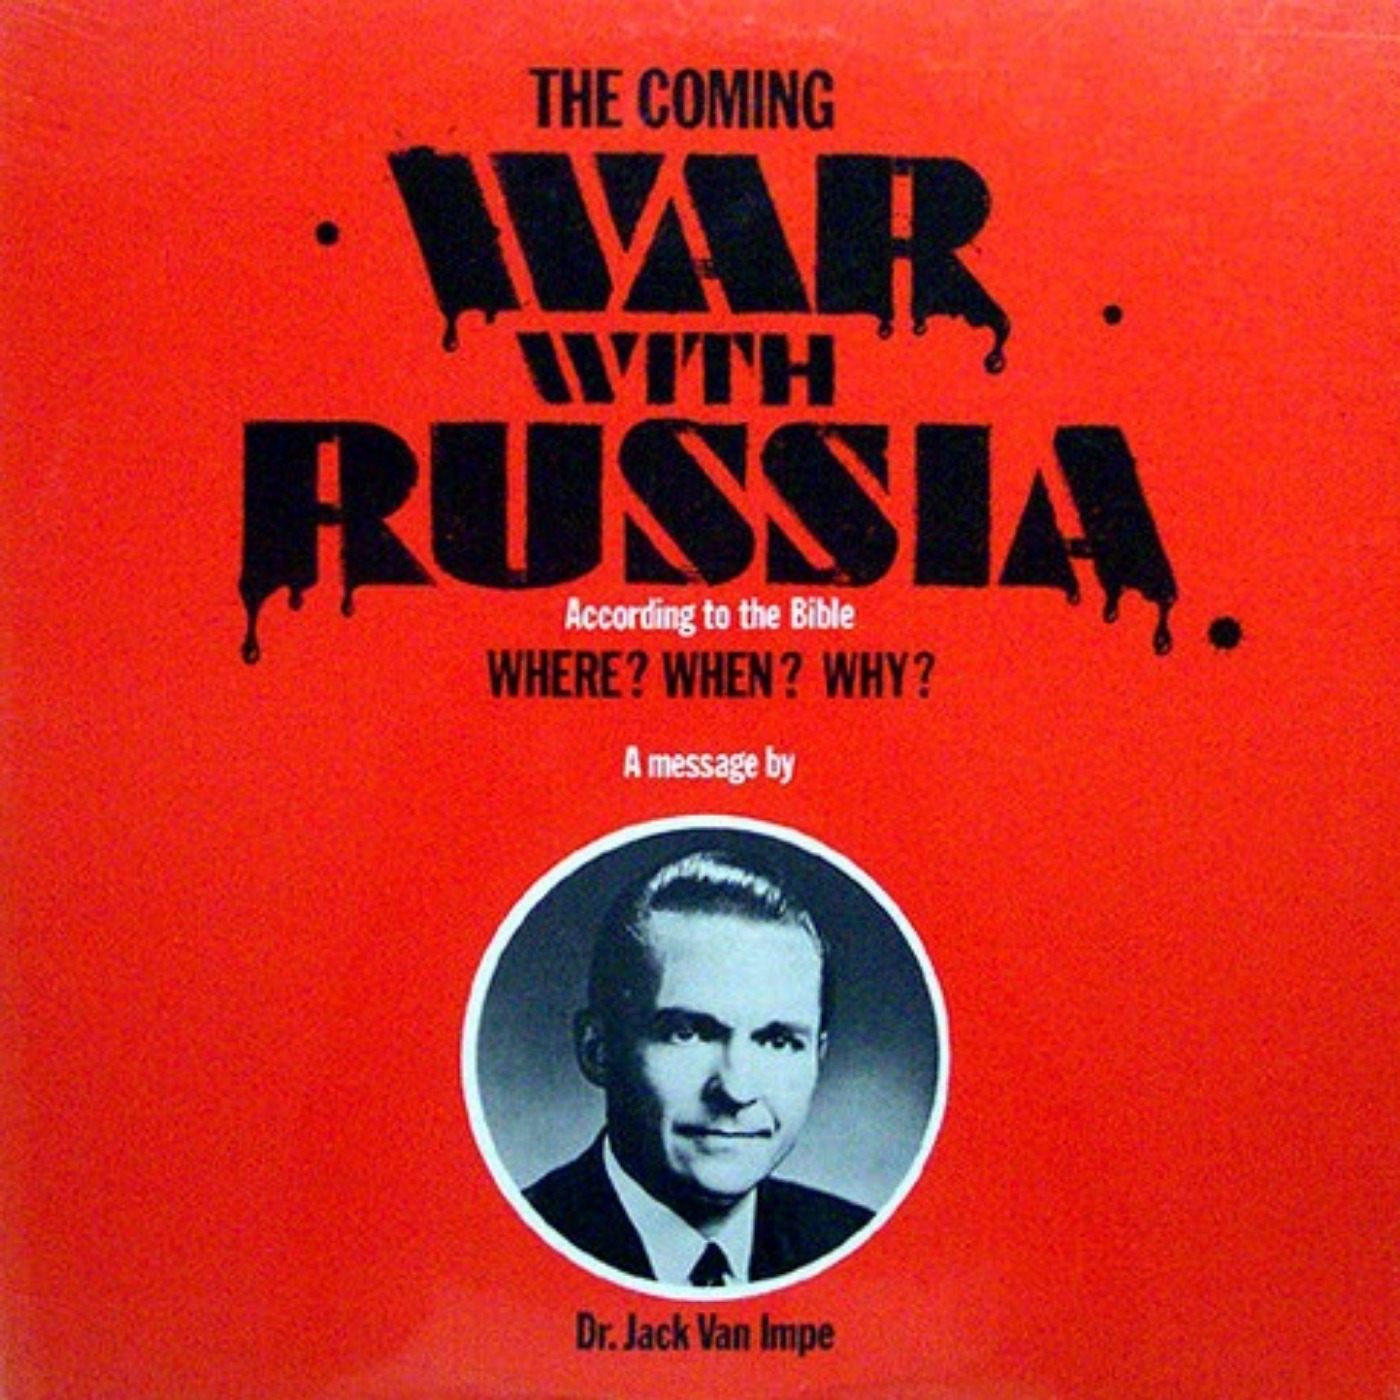 cover art for From the Archives 102: Jack Van Impe, The Coming War With Russia (1973)